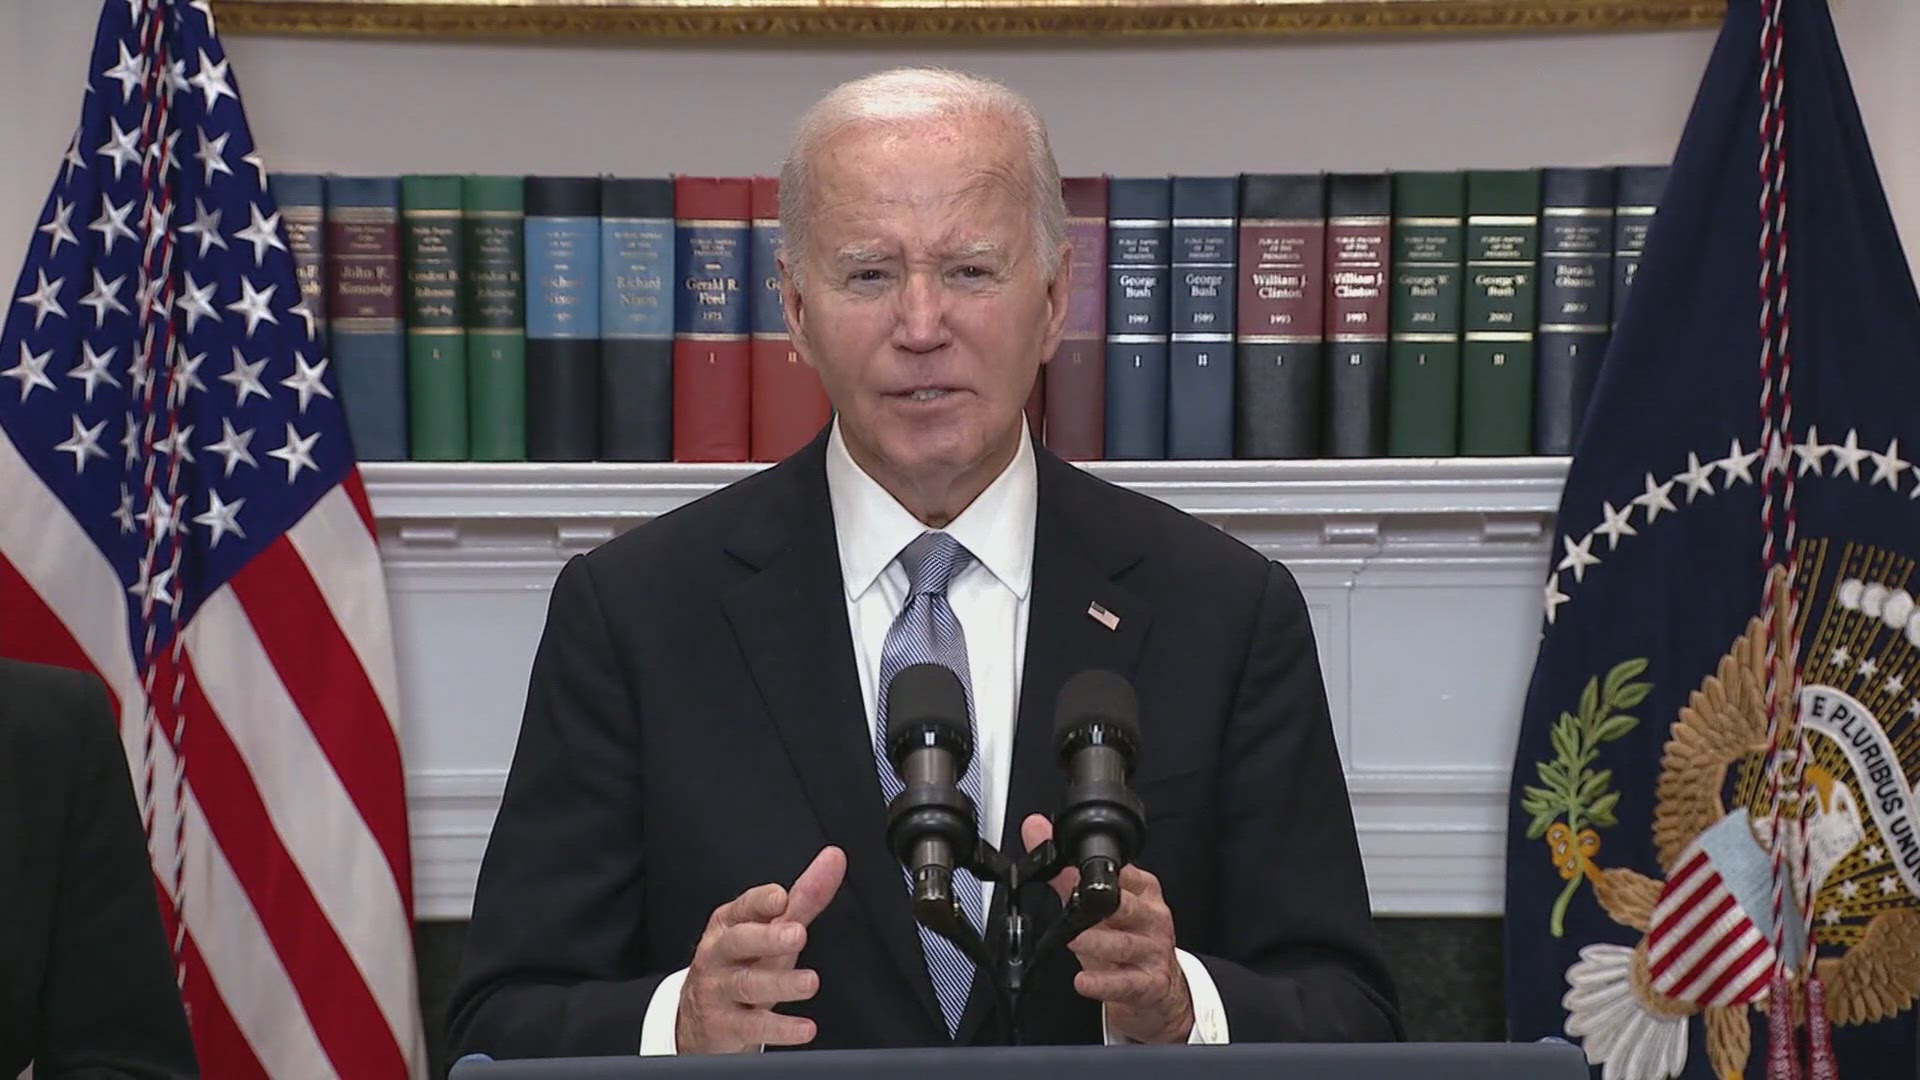 President Joe Biden is unveiling a long-awaited proposal for changes at the U.S. Supreme Court, calling on Congress to establish term limits and an ethics code.